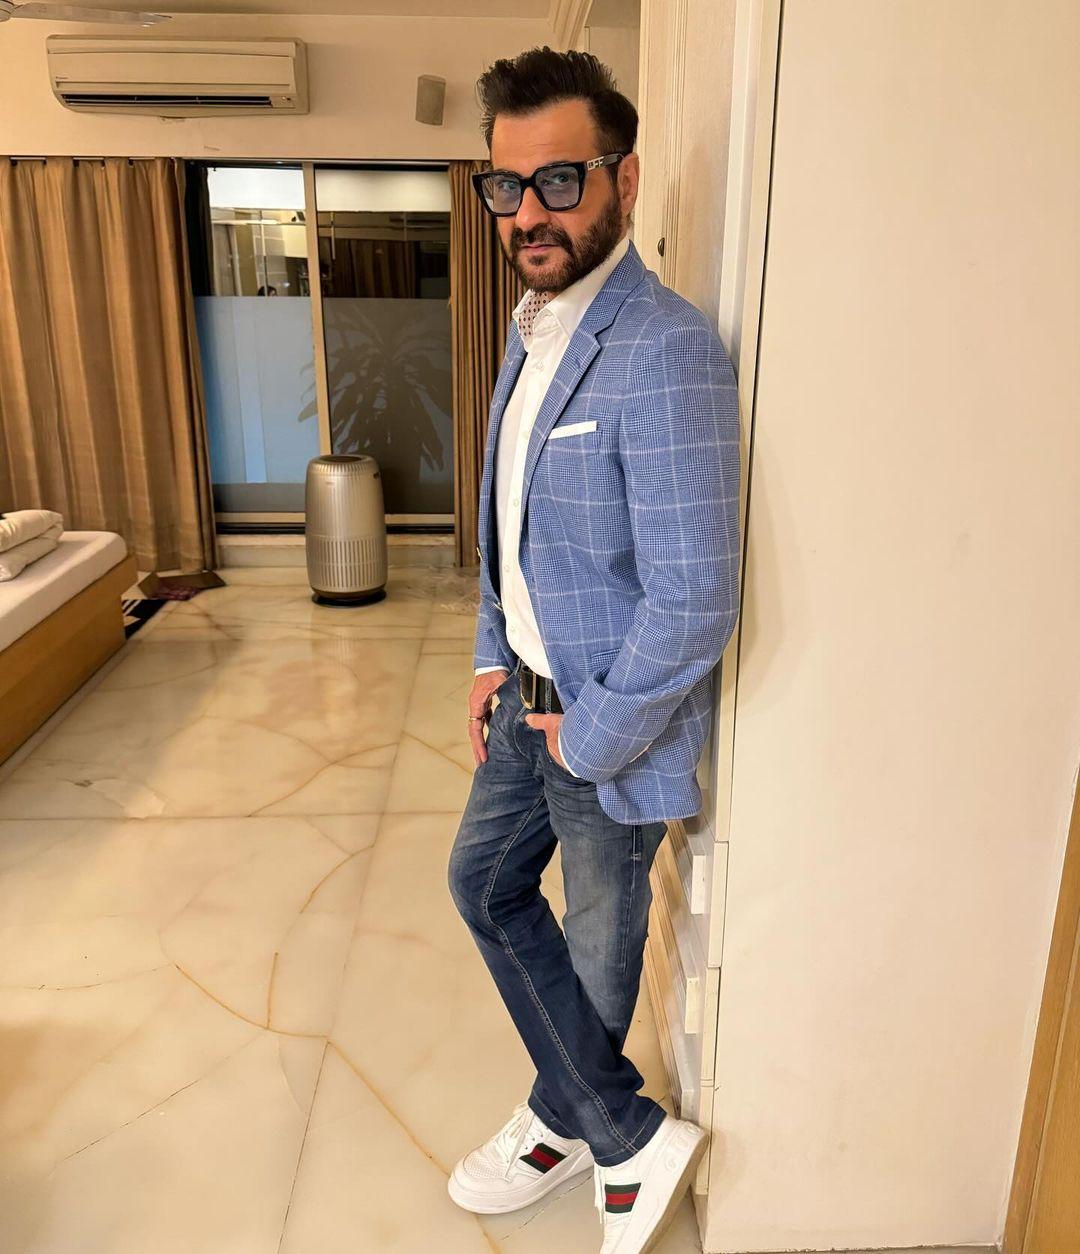 Sanjay Kapoor made his Hindi cinema debut in 1995 with Prem and went on to star in successful films like Raja and Sirf Tum. Beyond acting, he ventured into production with Sanjay Kapoor Entertainment Private Limited, alongside his wife, Maheep Sandhu. More recently, he's been shining in web series!